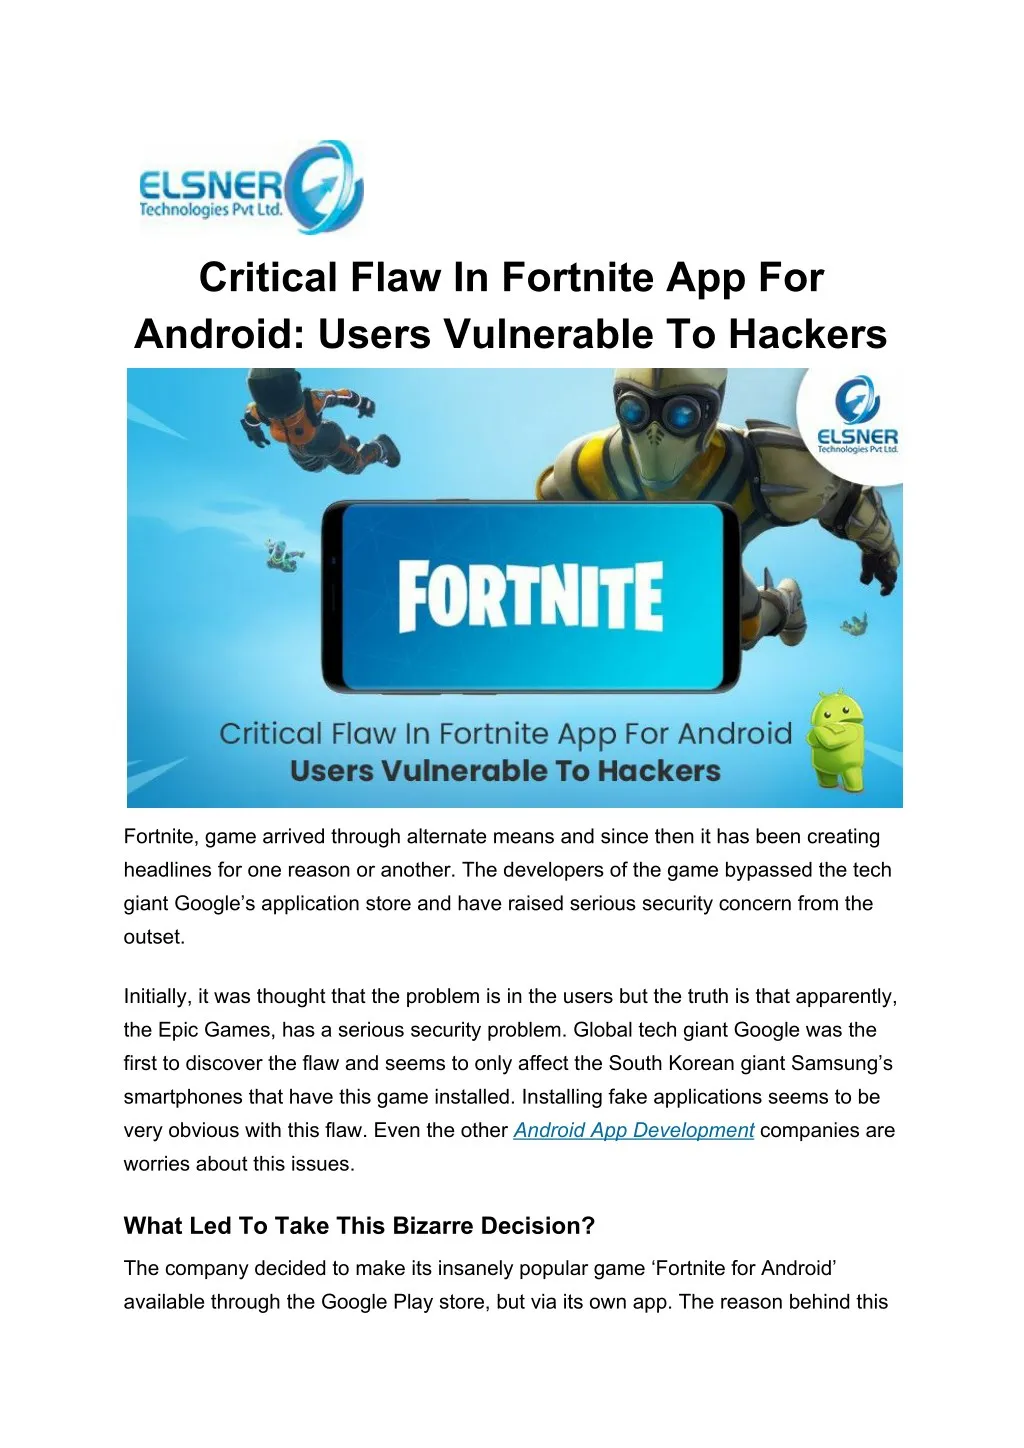 critical flaw in fortnite app for android users